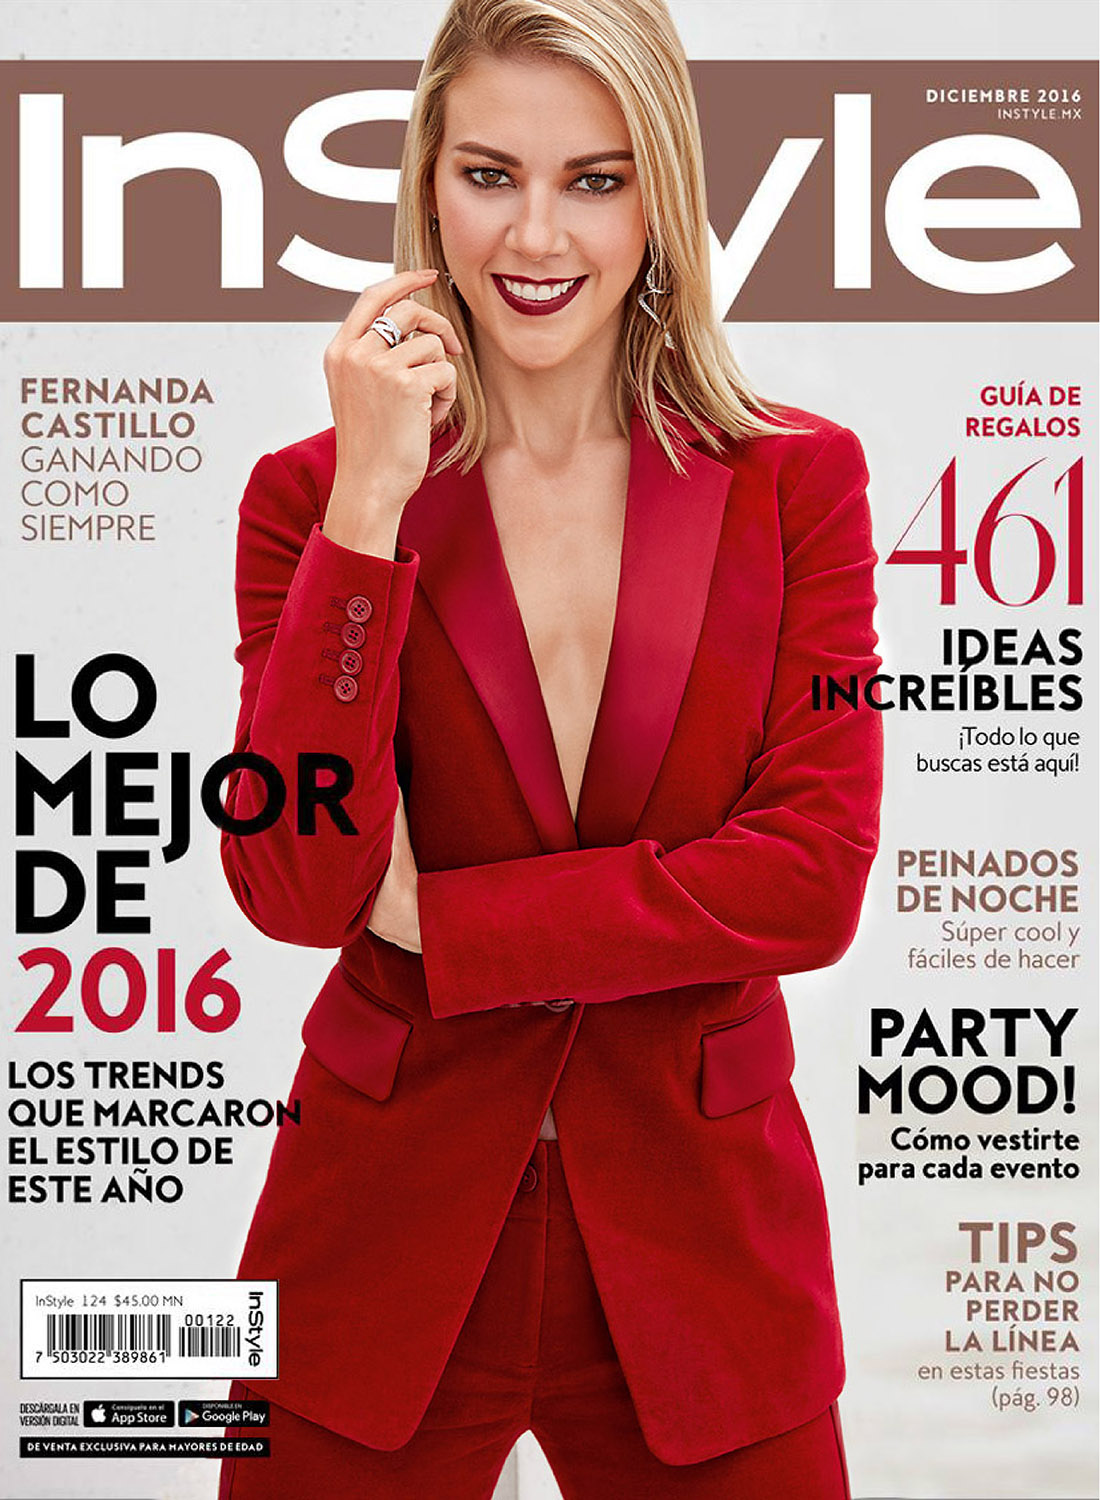 instyle-mexico-gregory-allen/